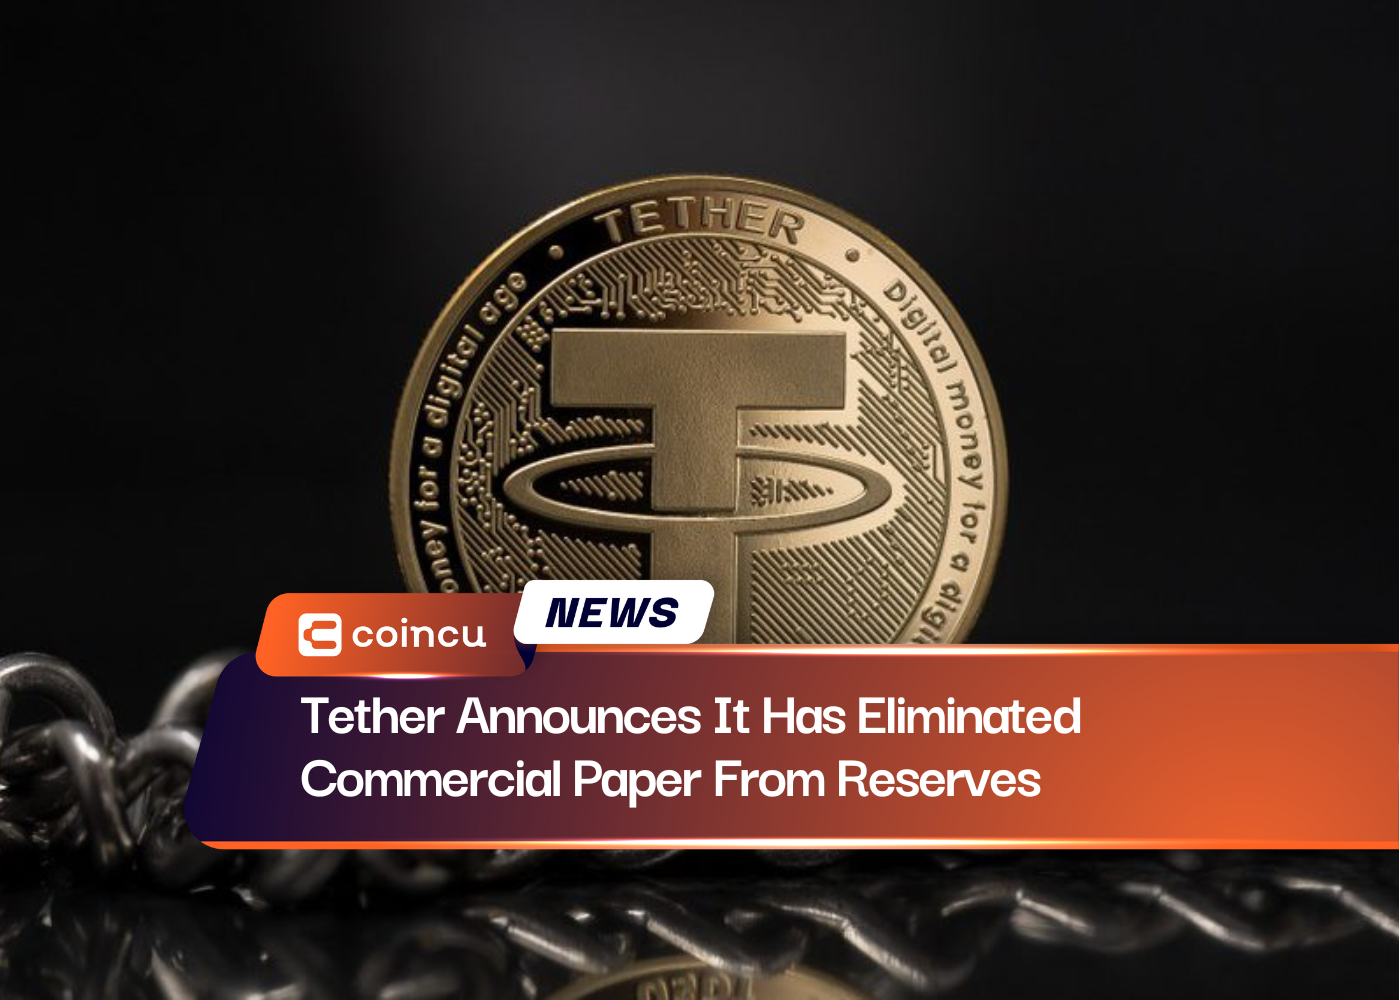 Tether Announces It Has Eliminated Commercial Paper From Reserves